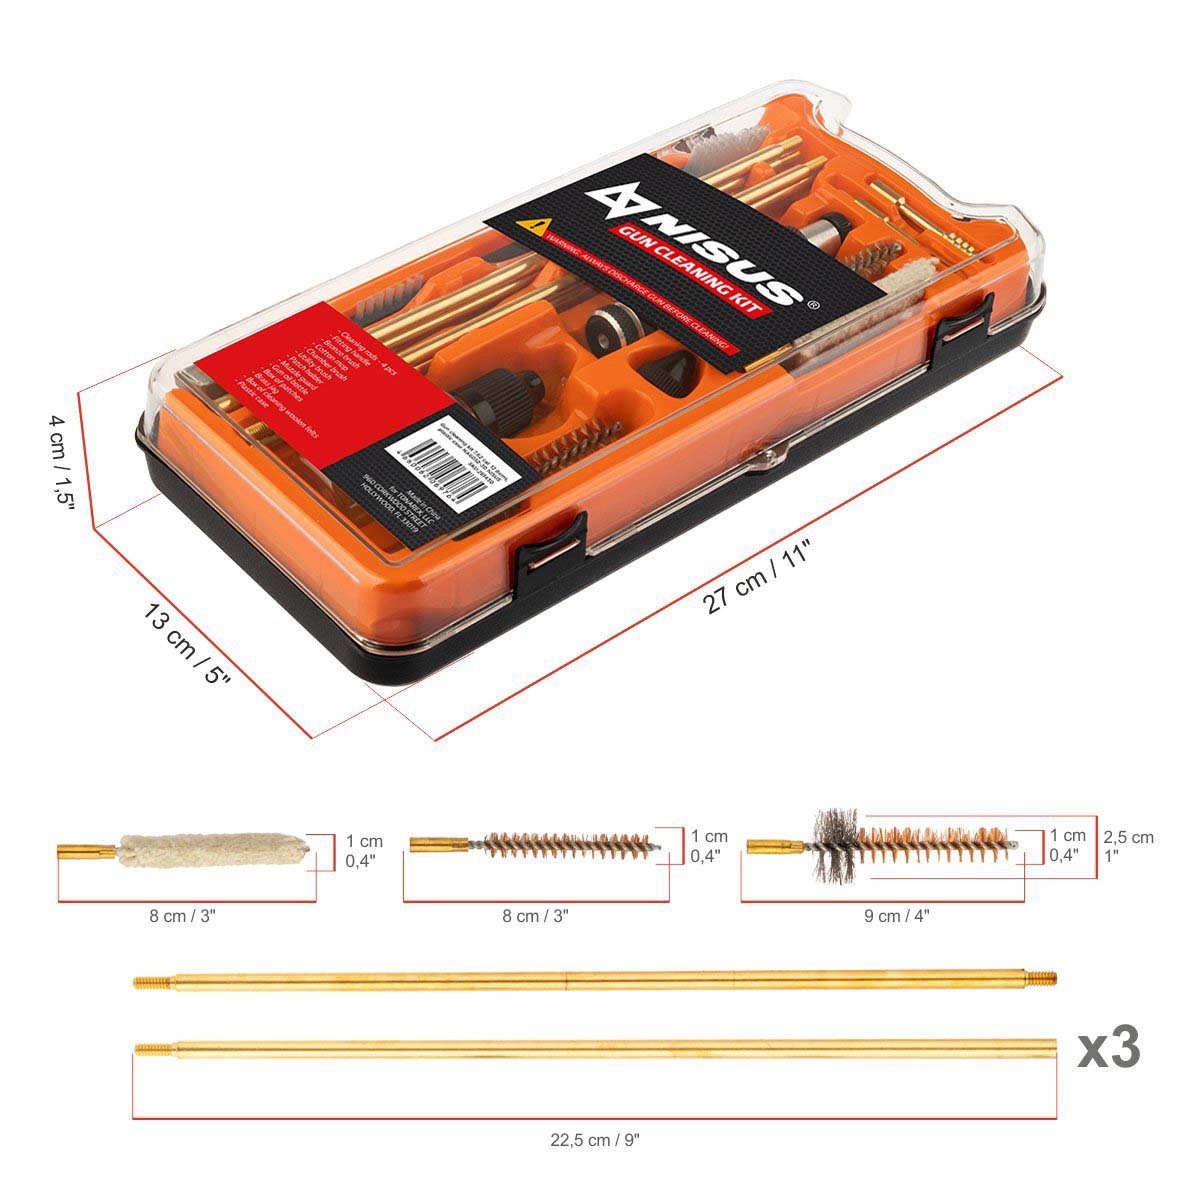 Gun Cleaning Kit, .308 Caliber, 12 Items, Plastic case is 11 inches long, 5 inches wide and 1.5 inches high